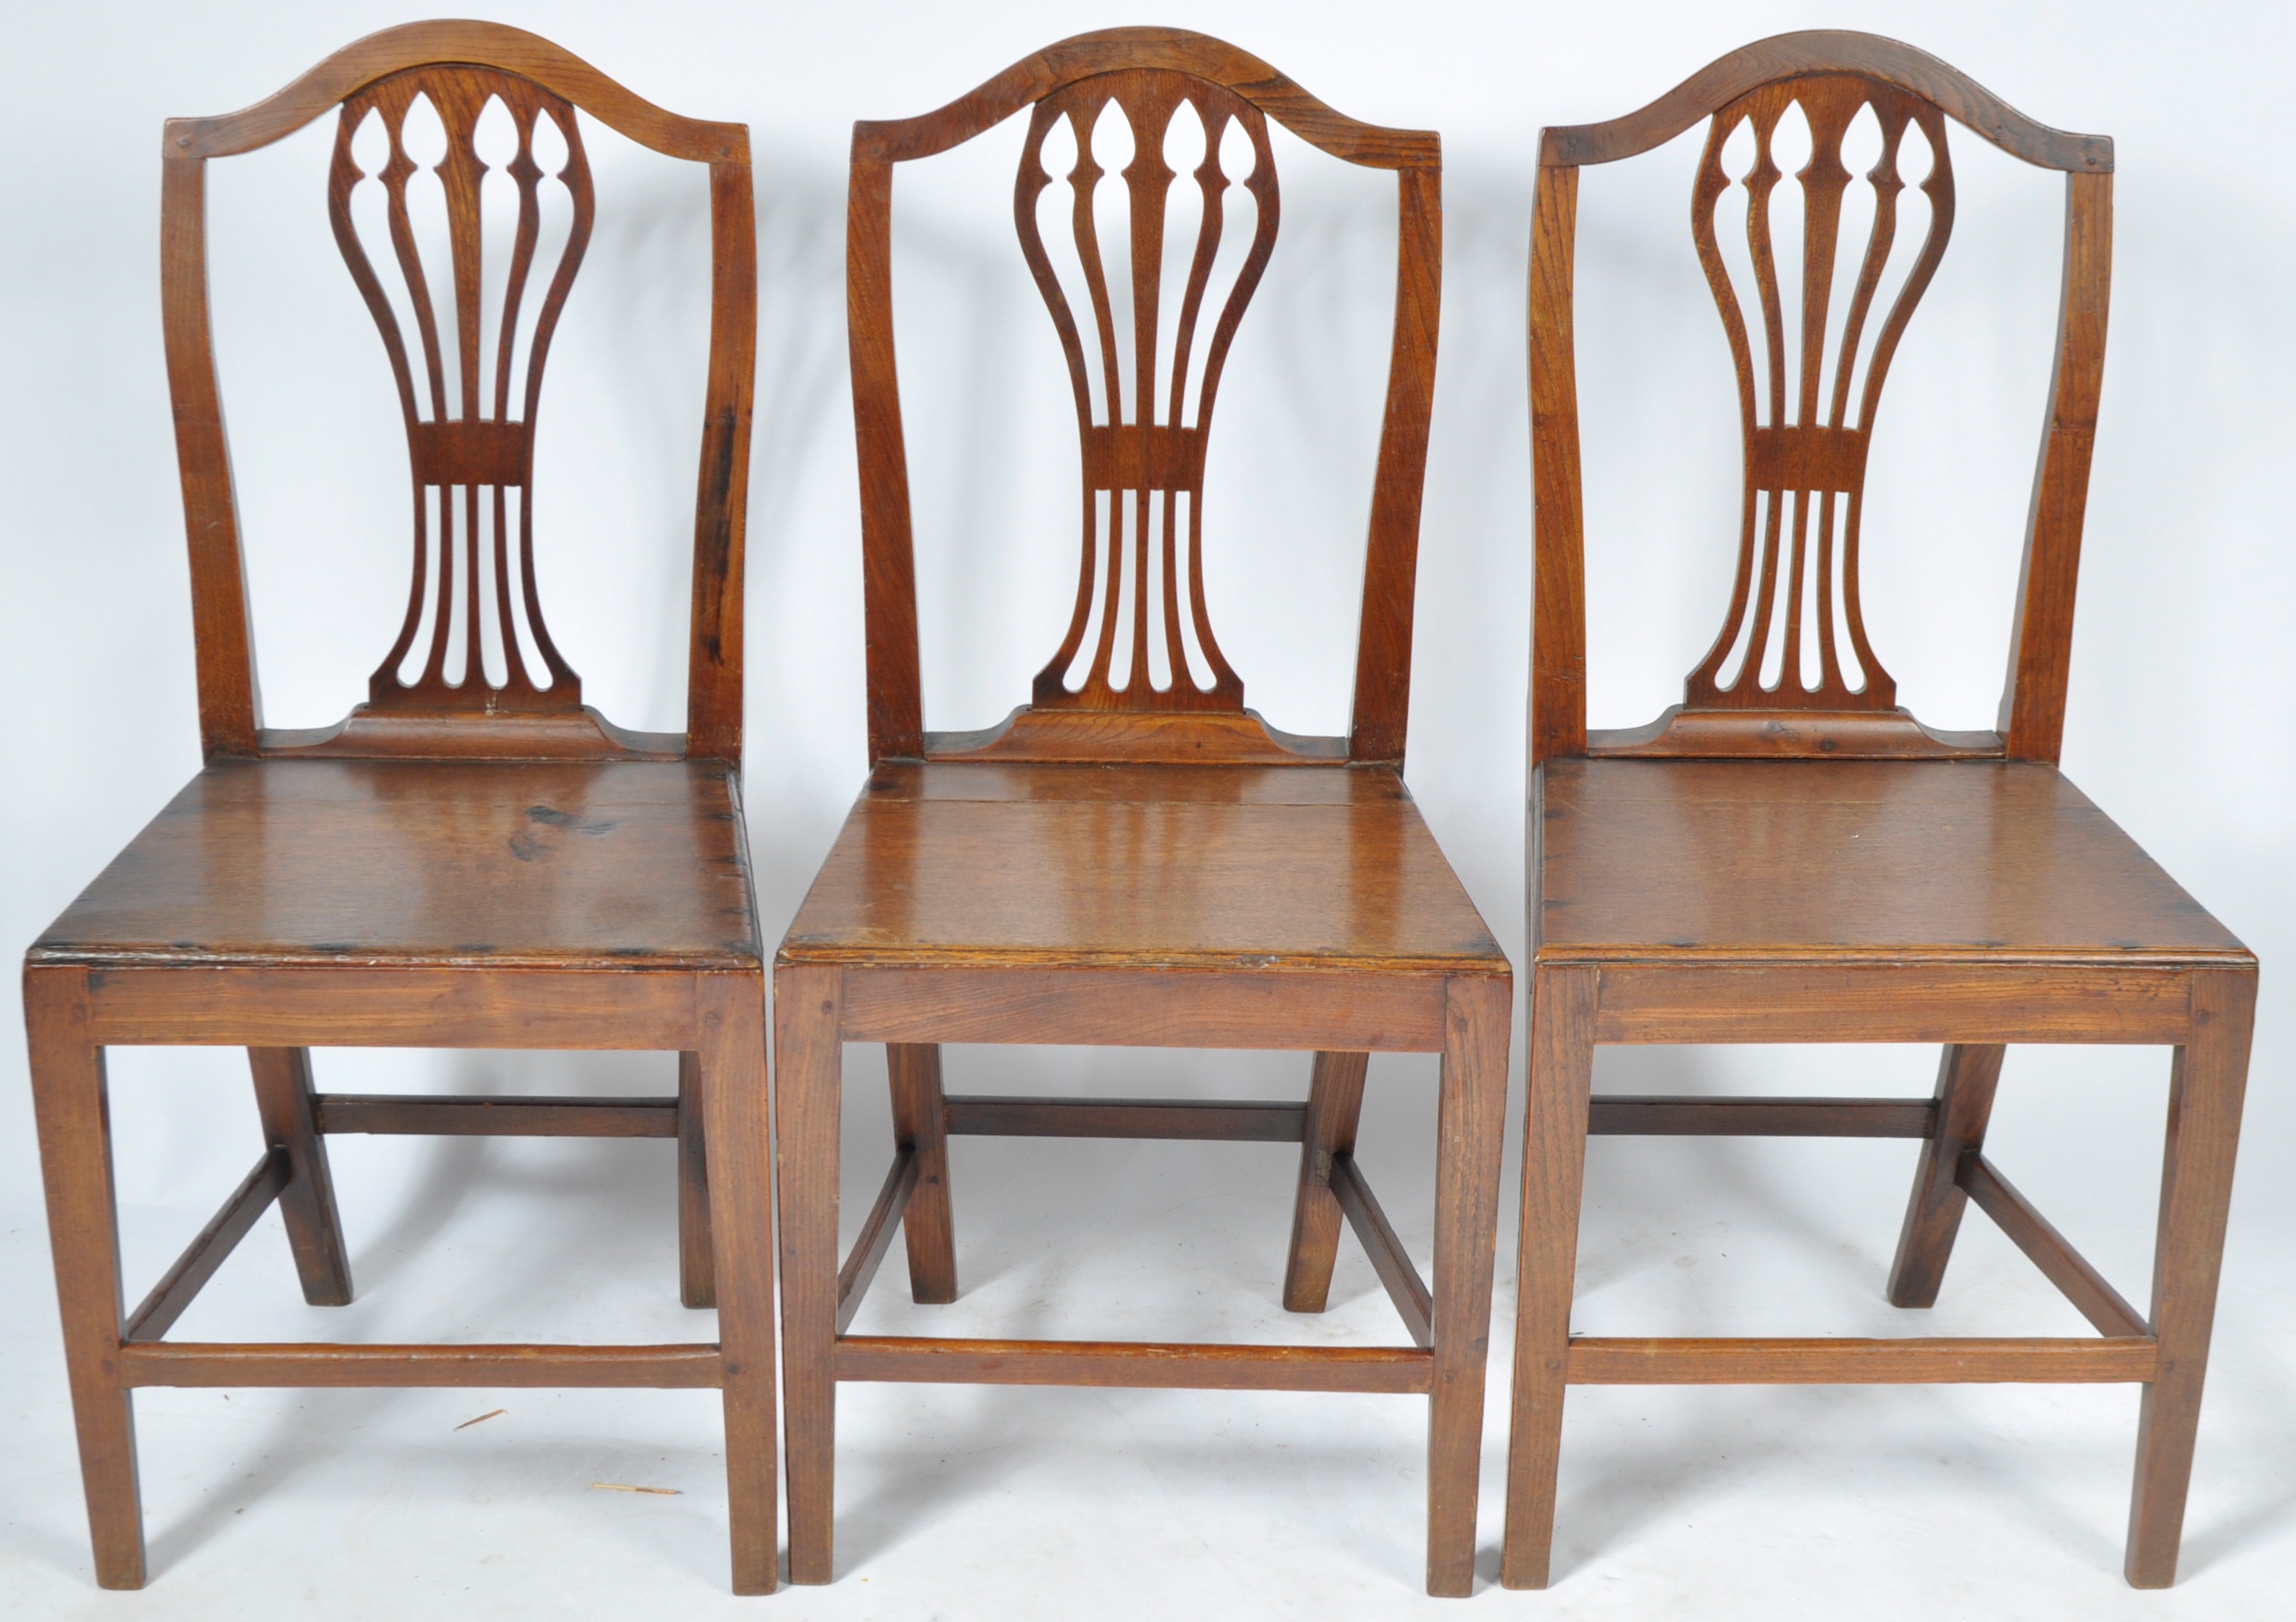 SET OF SIX 18TH CENTURY CHIPPENDALE STYLE OAK & ELM DINING CHAIRS - Image 3 of 11